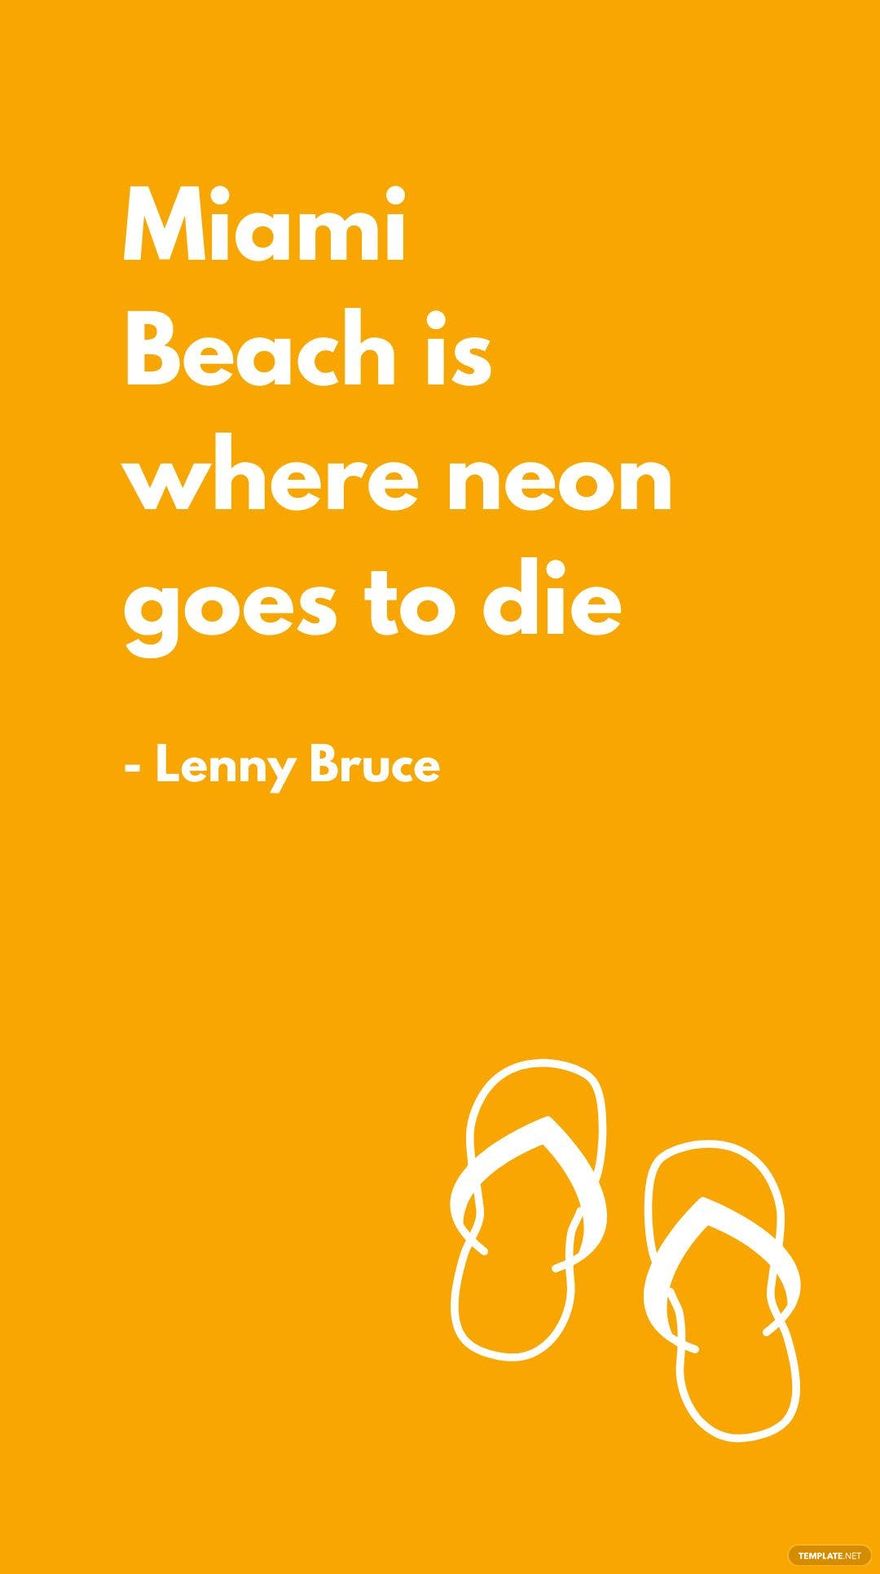 Lenny Bruce - Miami Beach is where neon goes to die in JPG